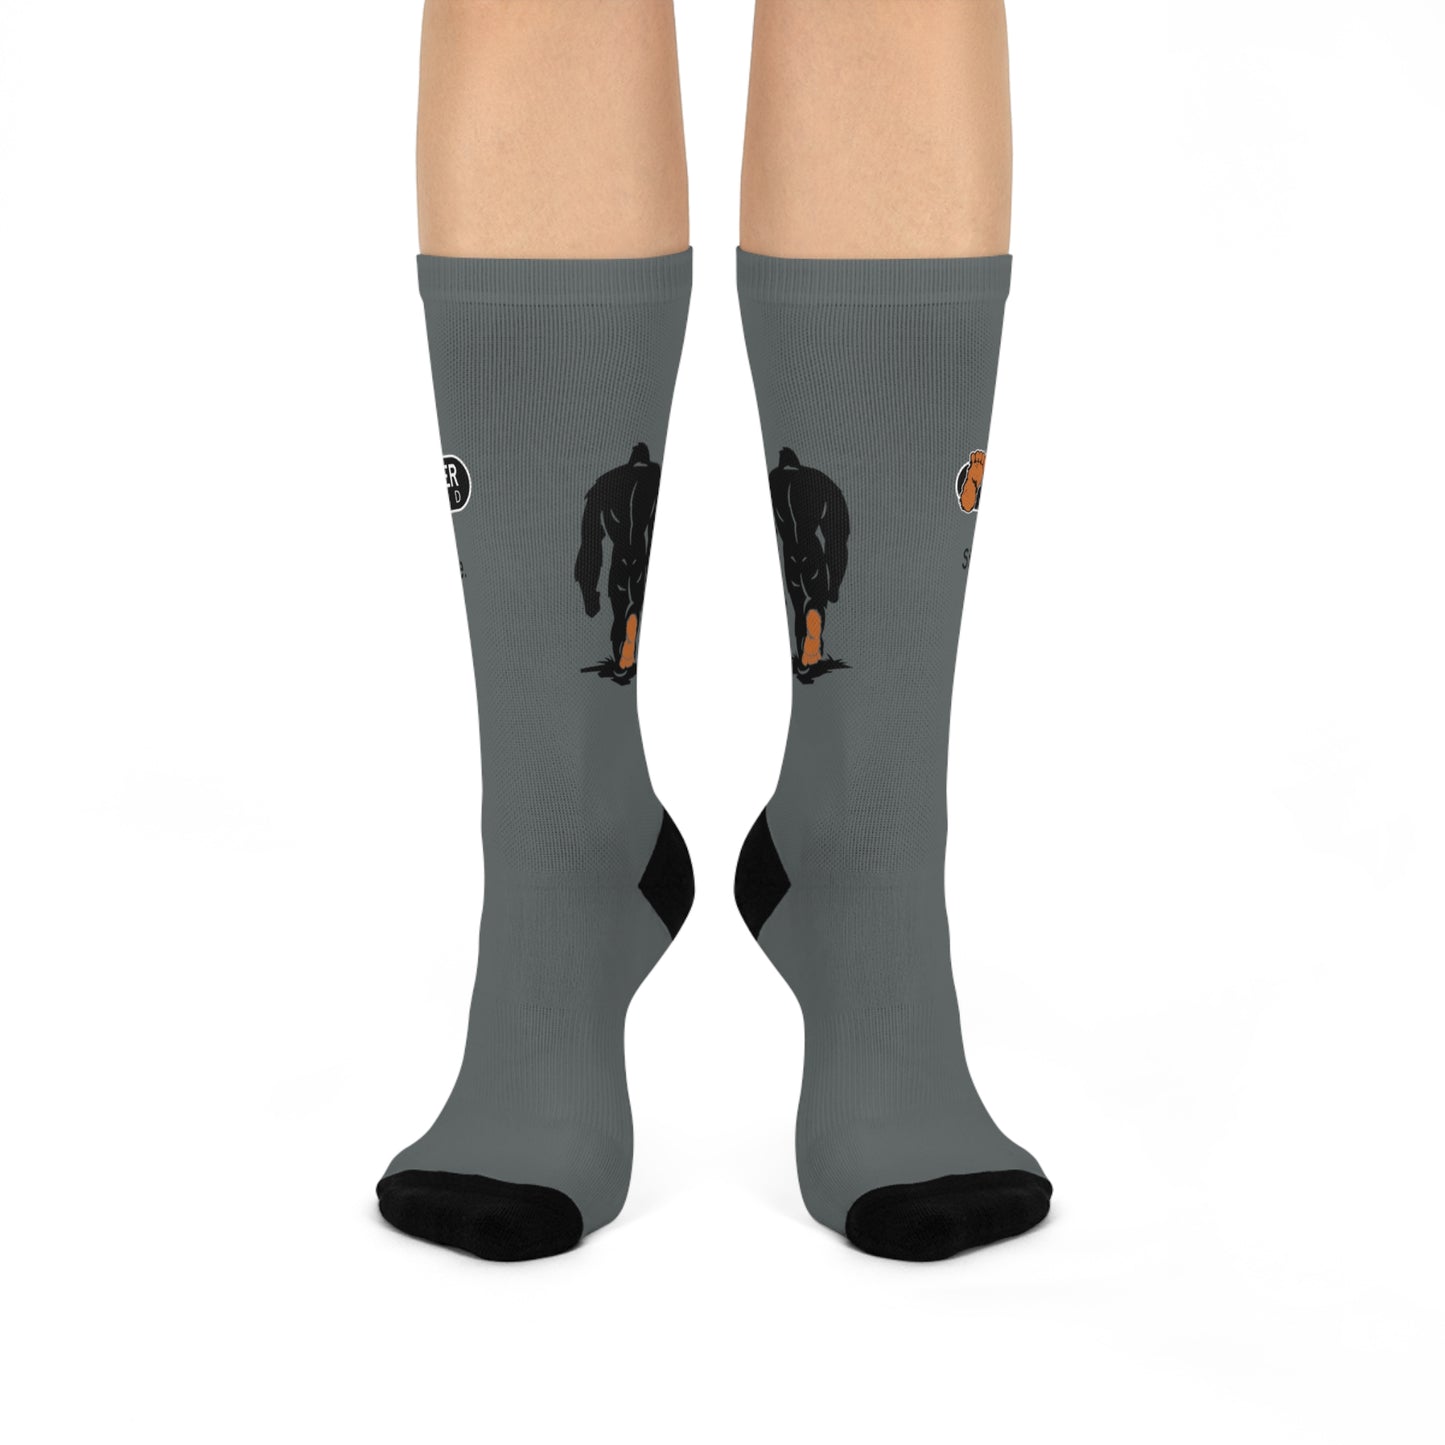 "Strut Your Ride!" with Flatlander Offroad Cushioned Crew Socks